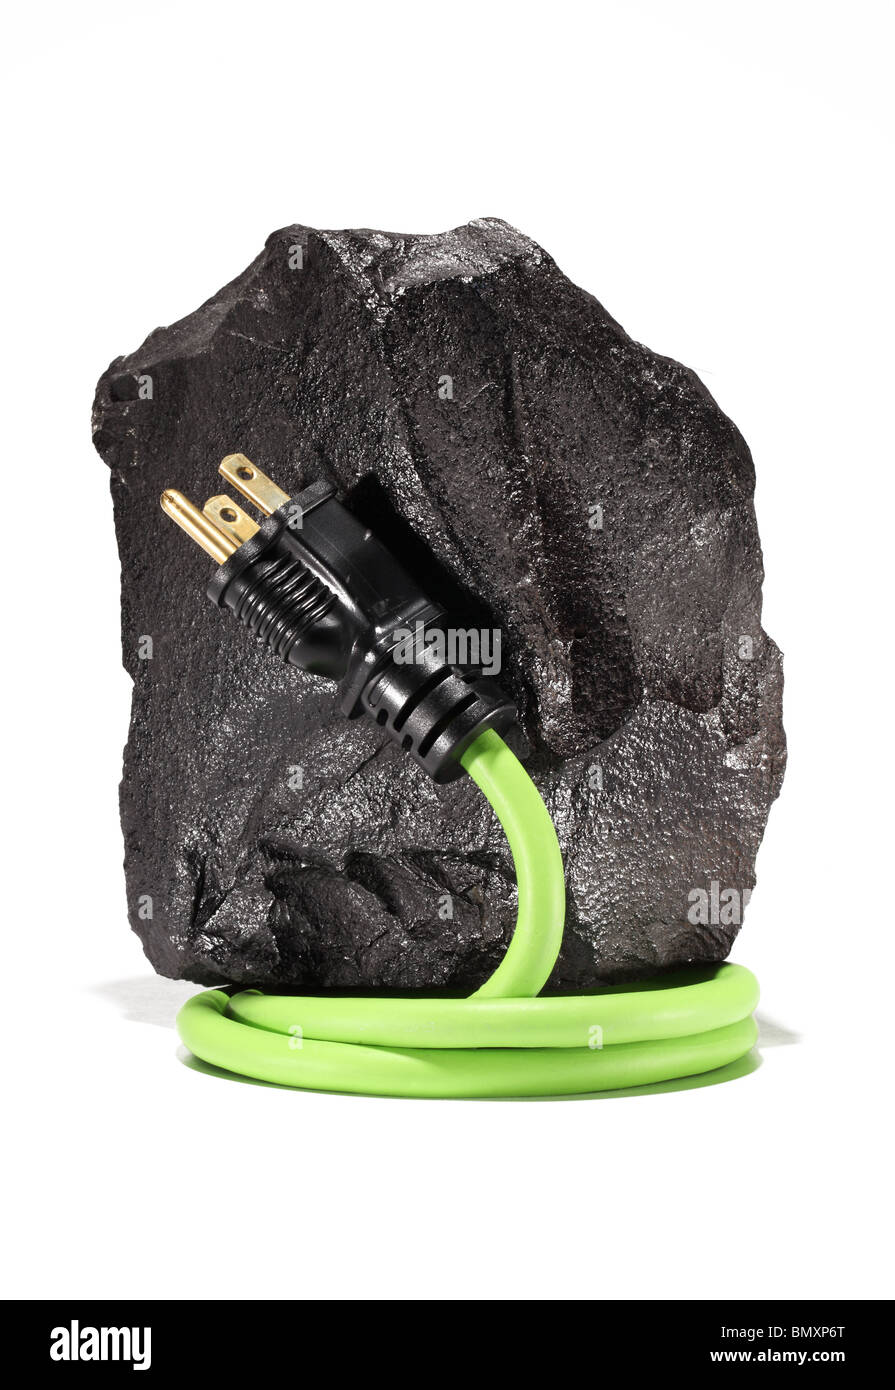 A large black piece of coal with a green electrical extension cord and plug wrapping around on a white background. Stock Photo